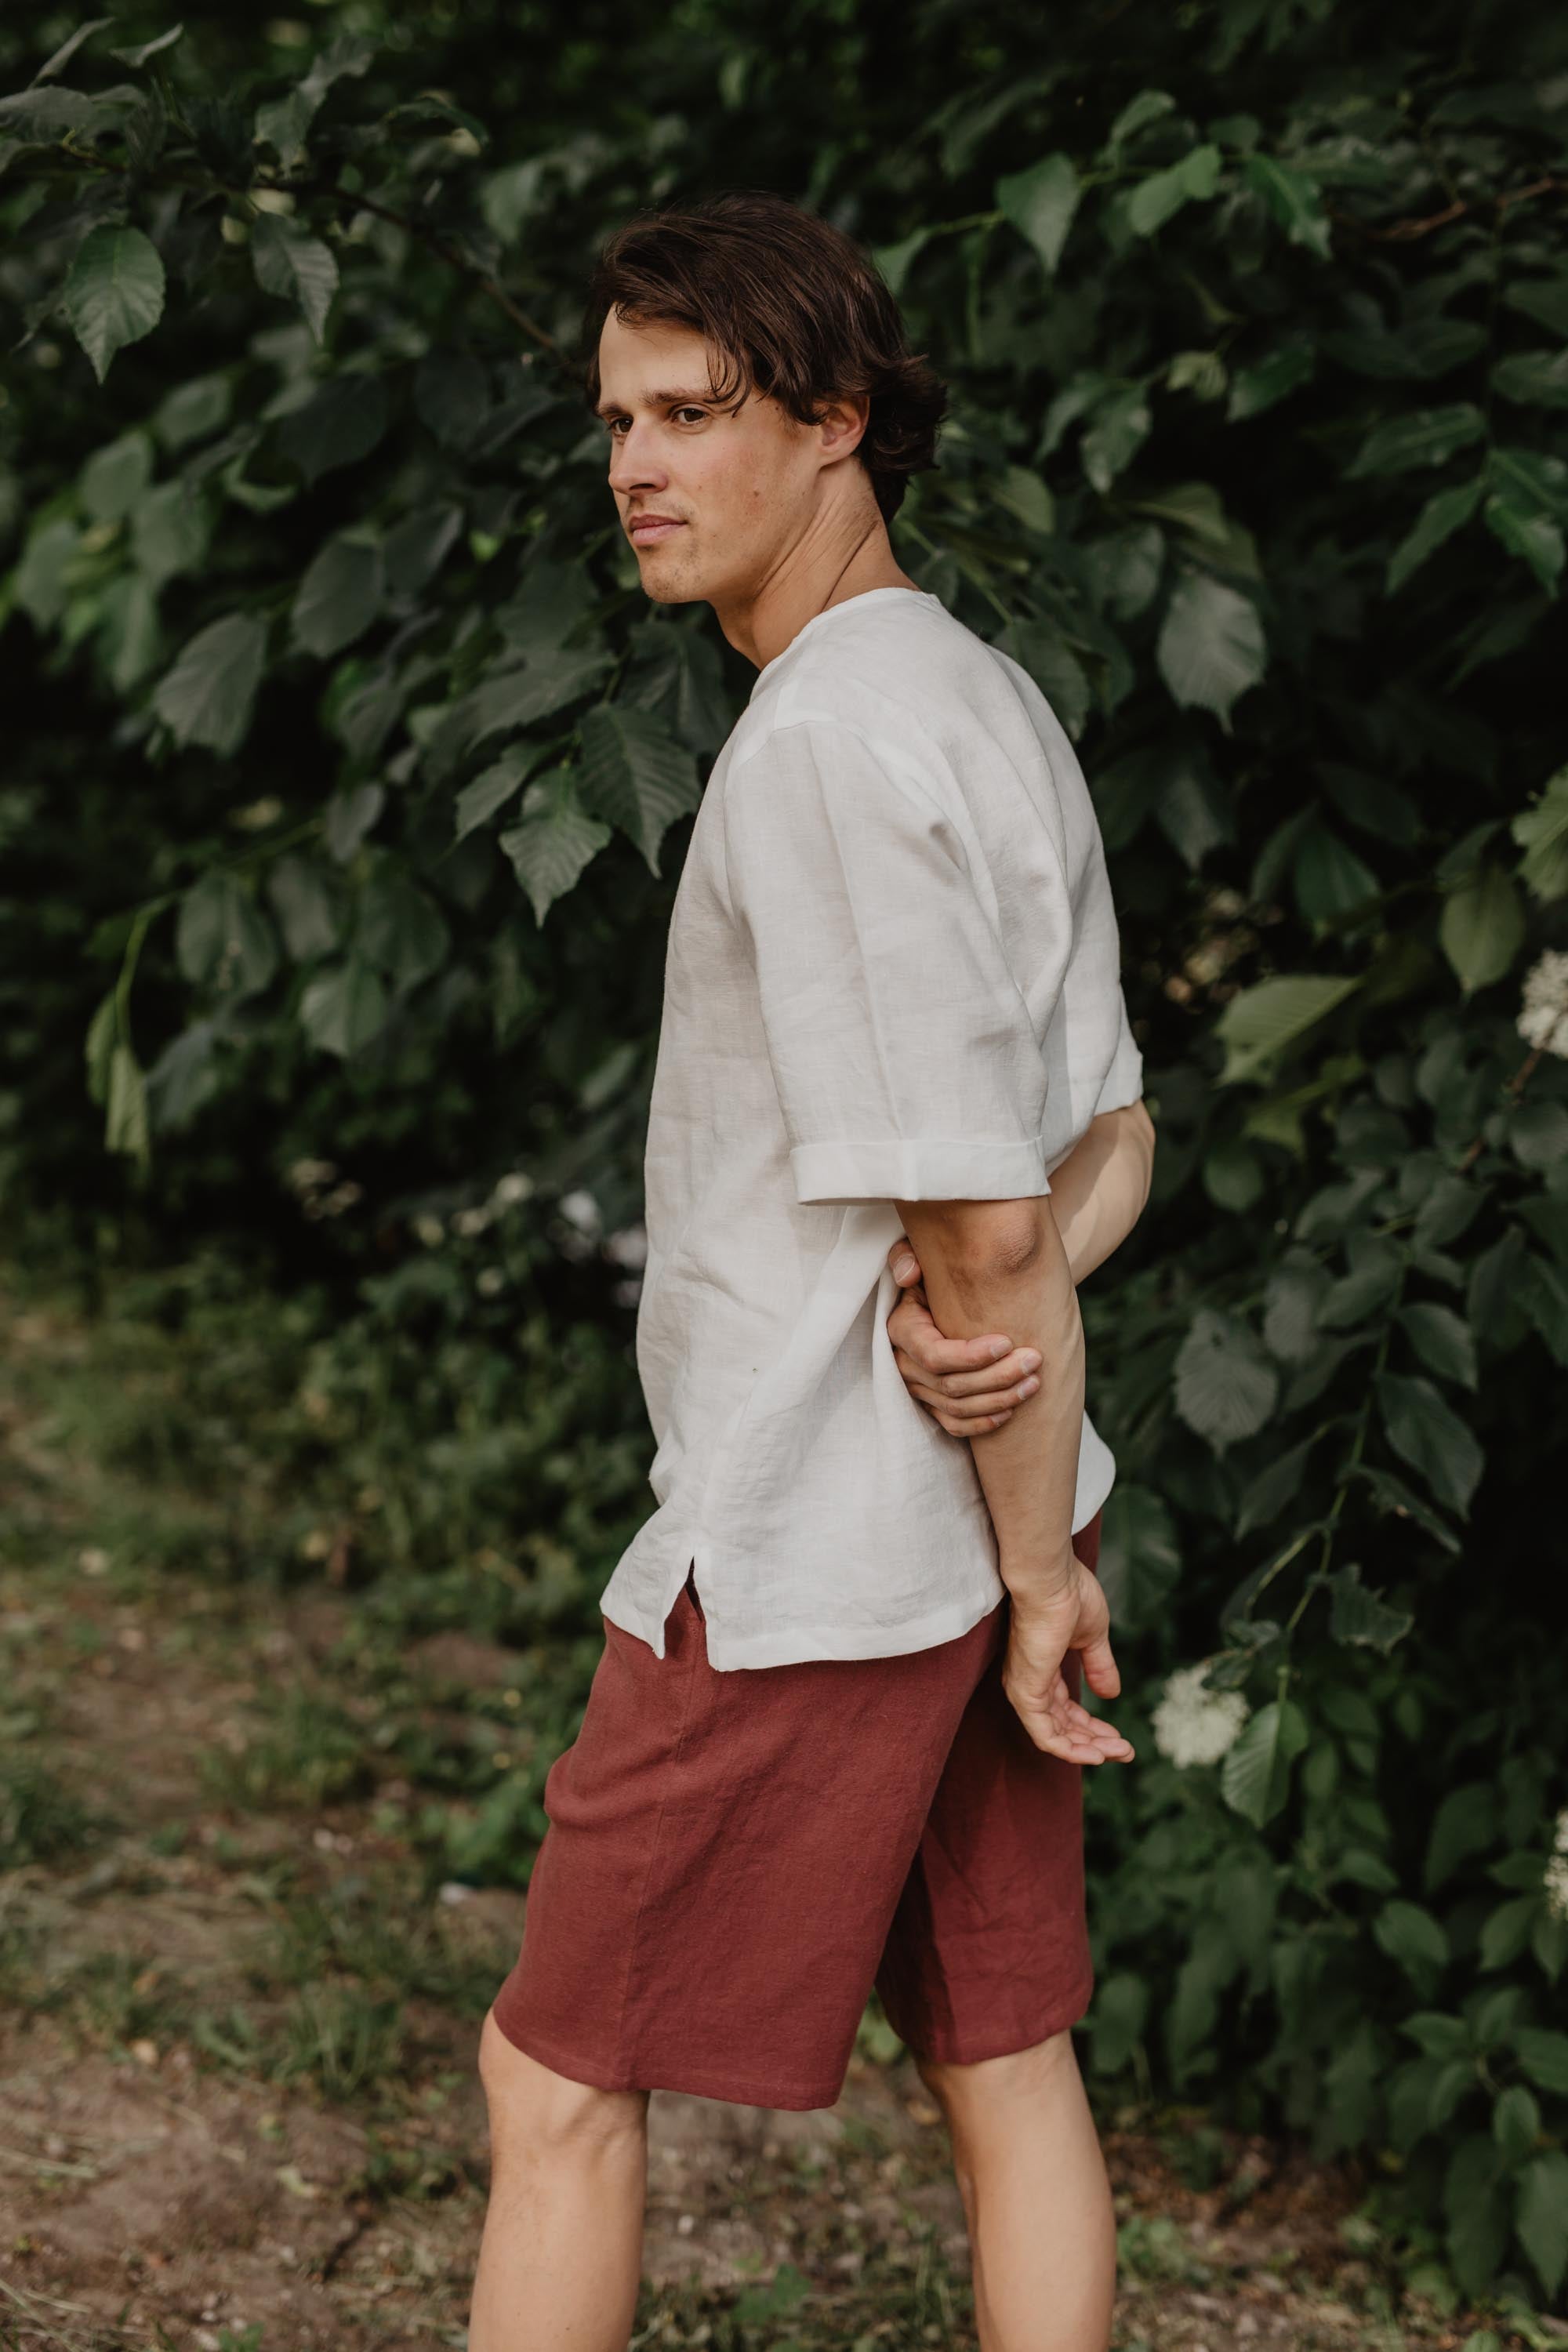 Man In Nature Looking To The Side Wearing A White Linen Top And Terracotta Shorts